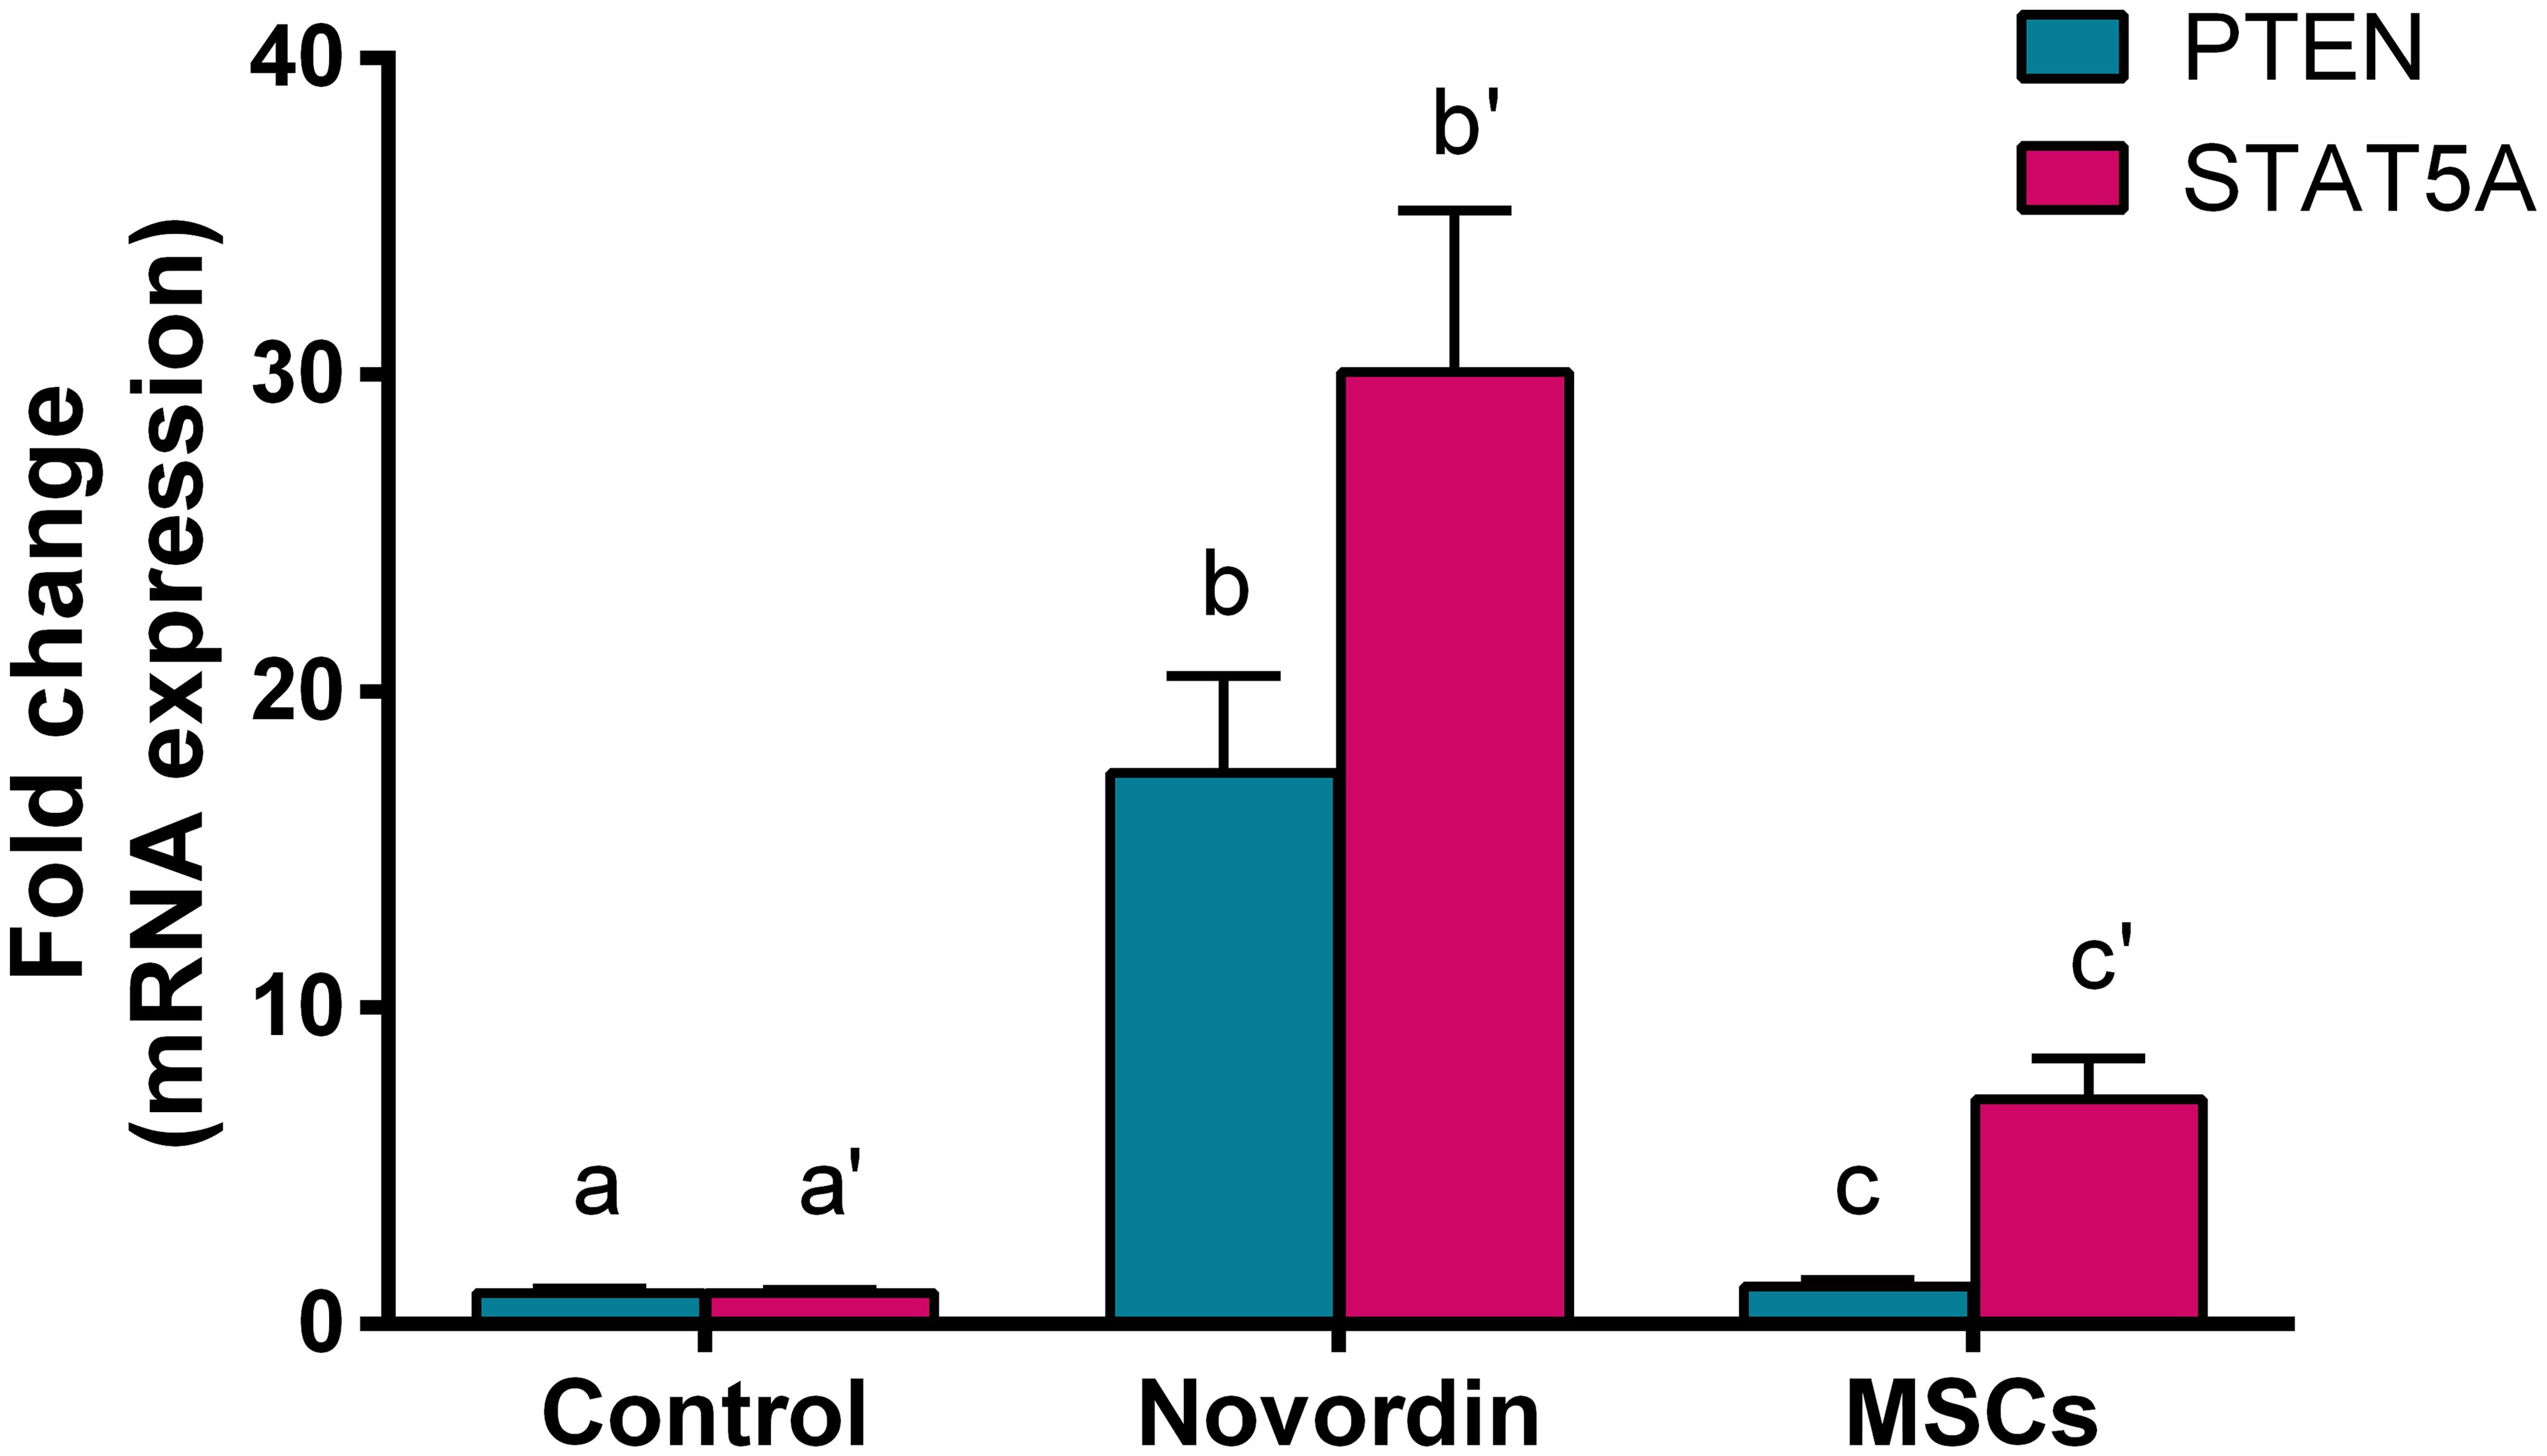 Impact of MSCs on the hepatic mRNA gene expression of PTEN and STAT5A post-novordin intoxication.